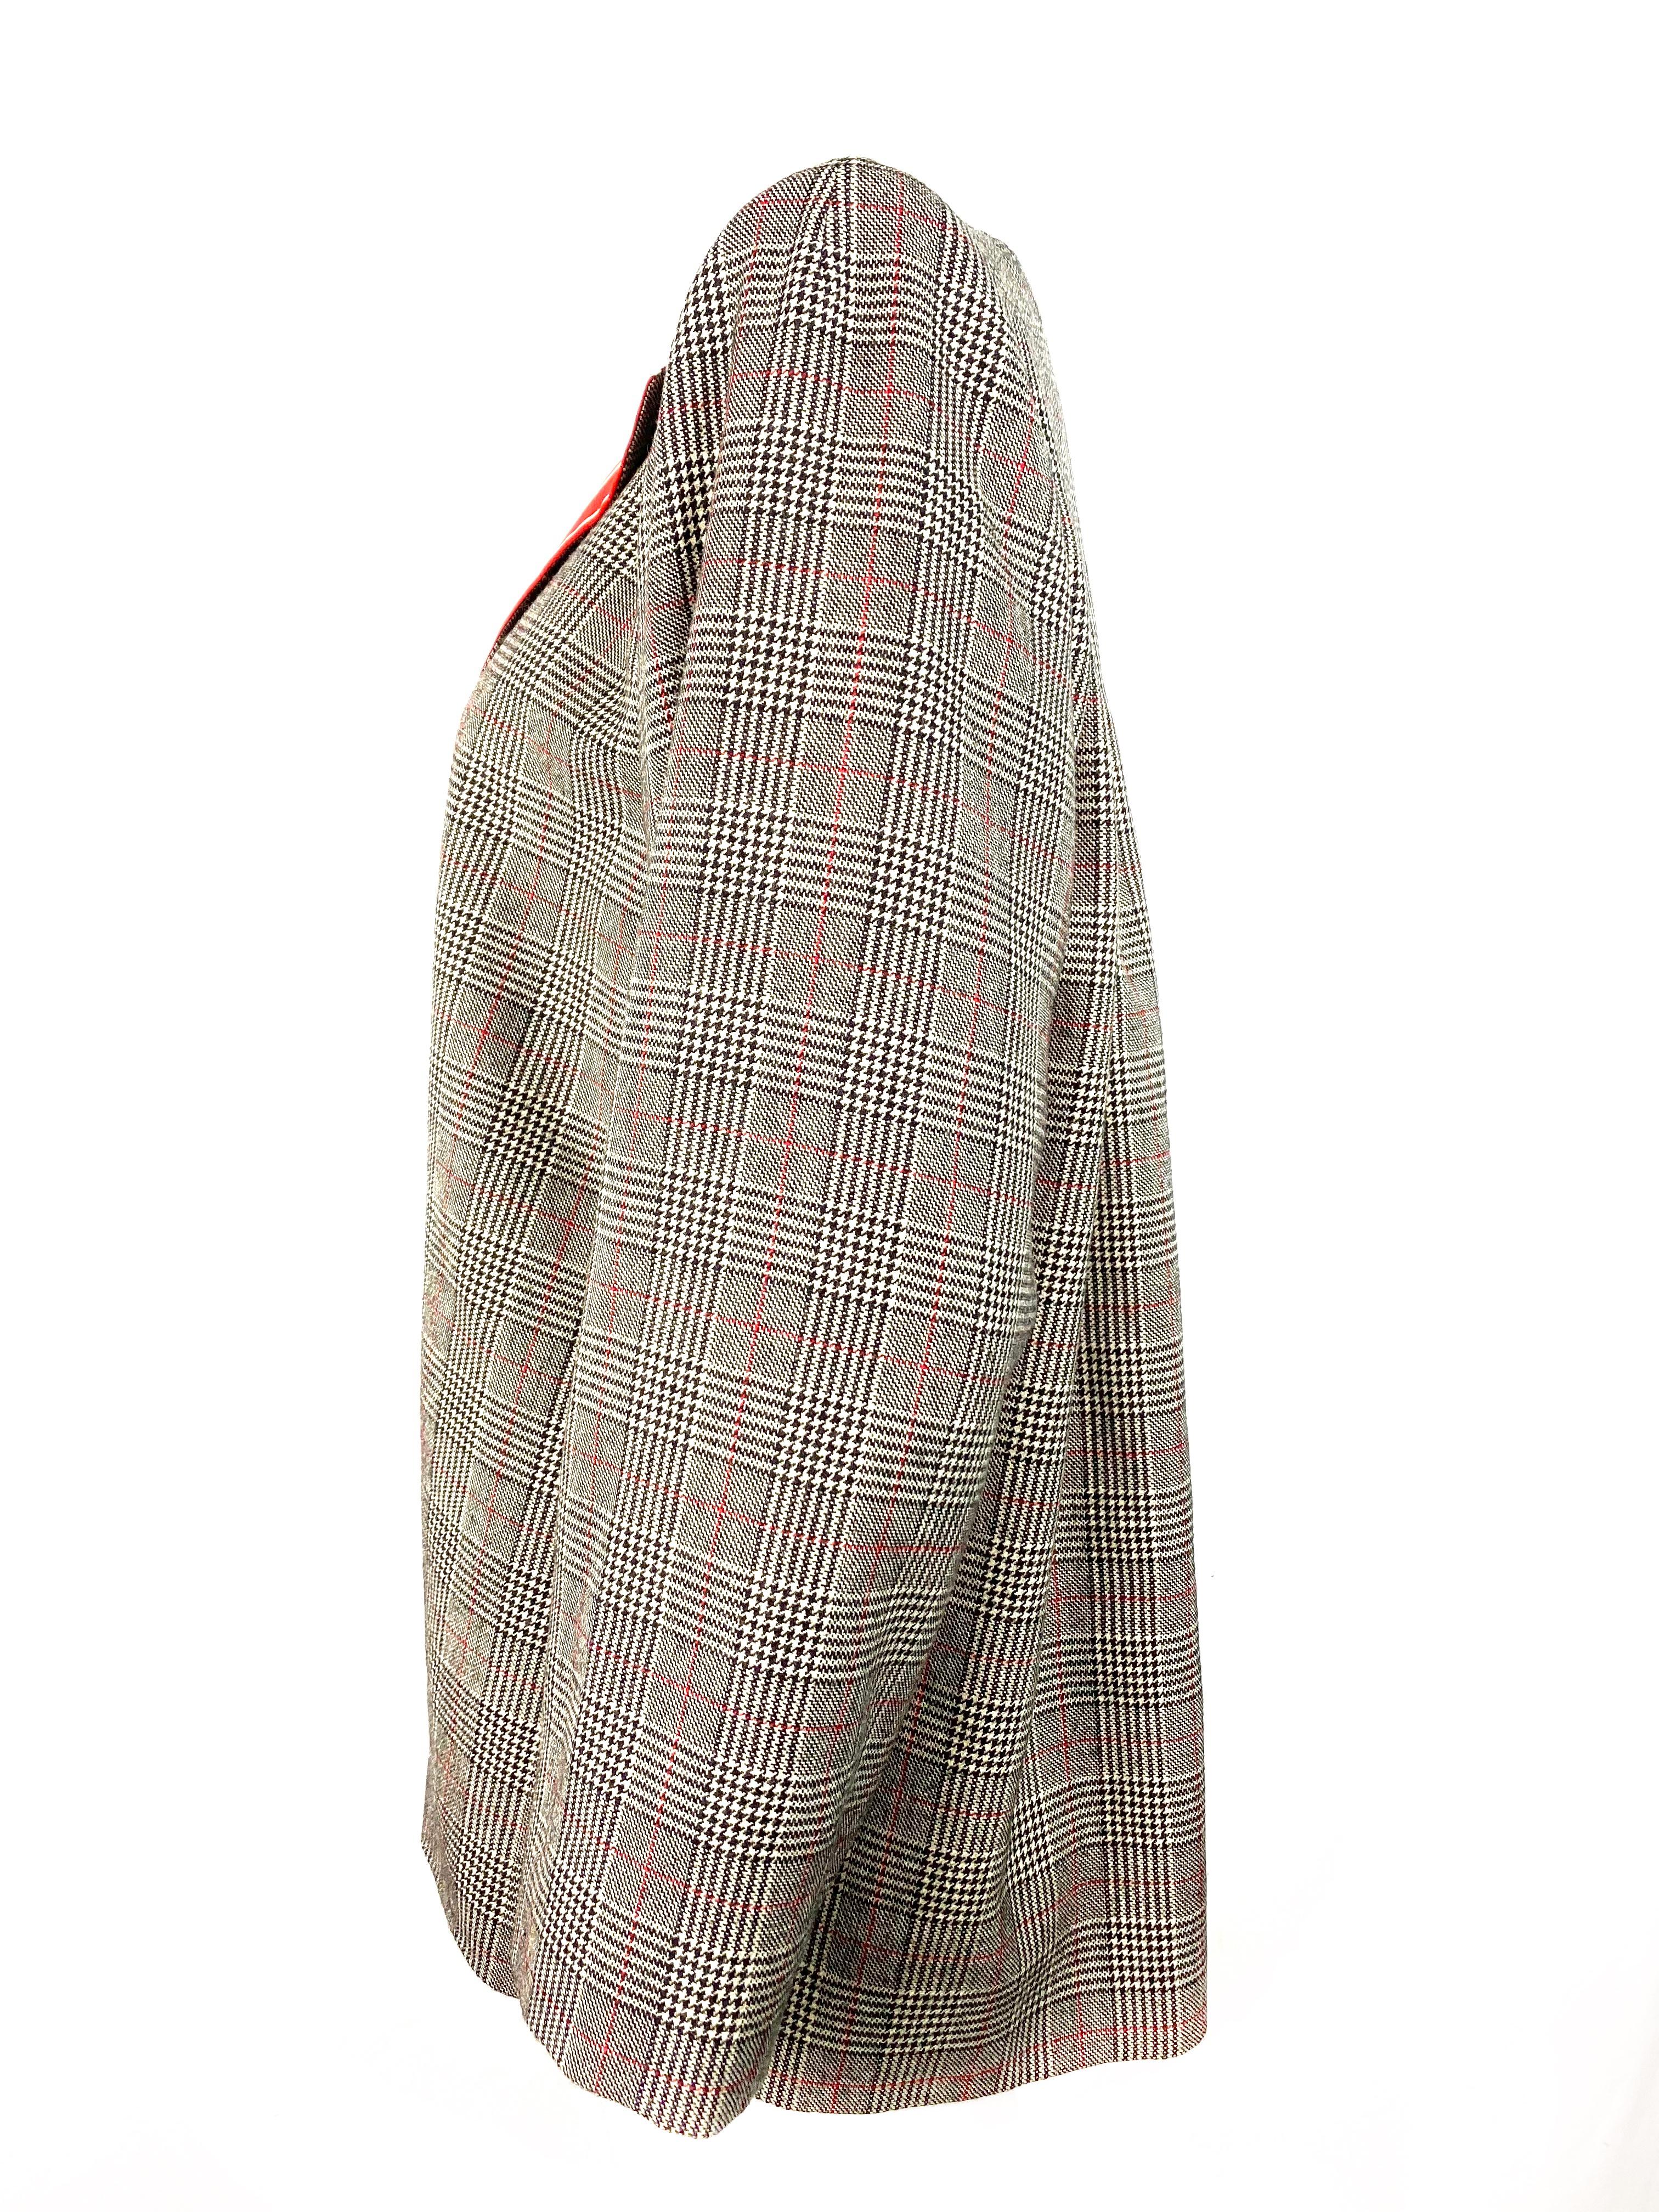 Galanos Amen Wardy Grey and Red Check Plaid Jacket  For Sale 1